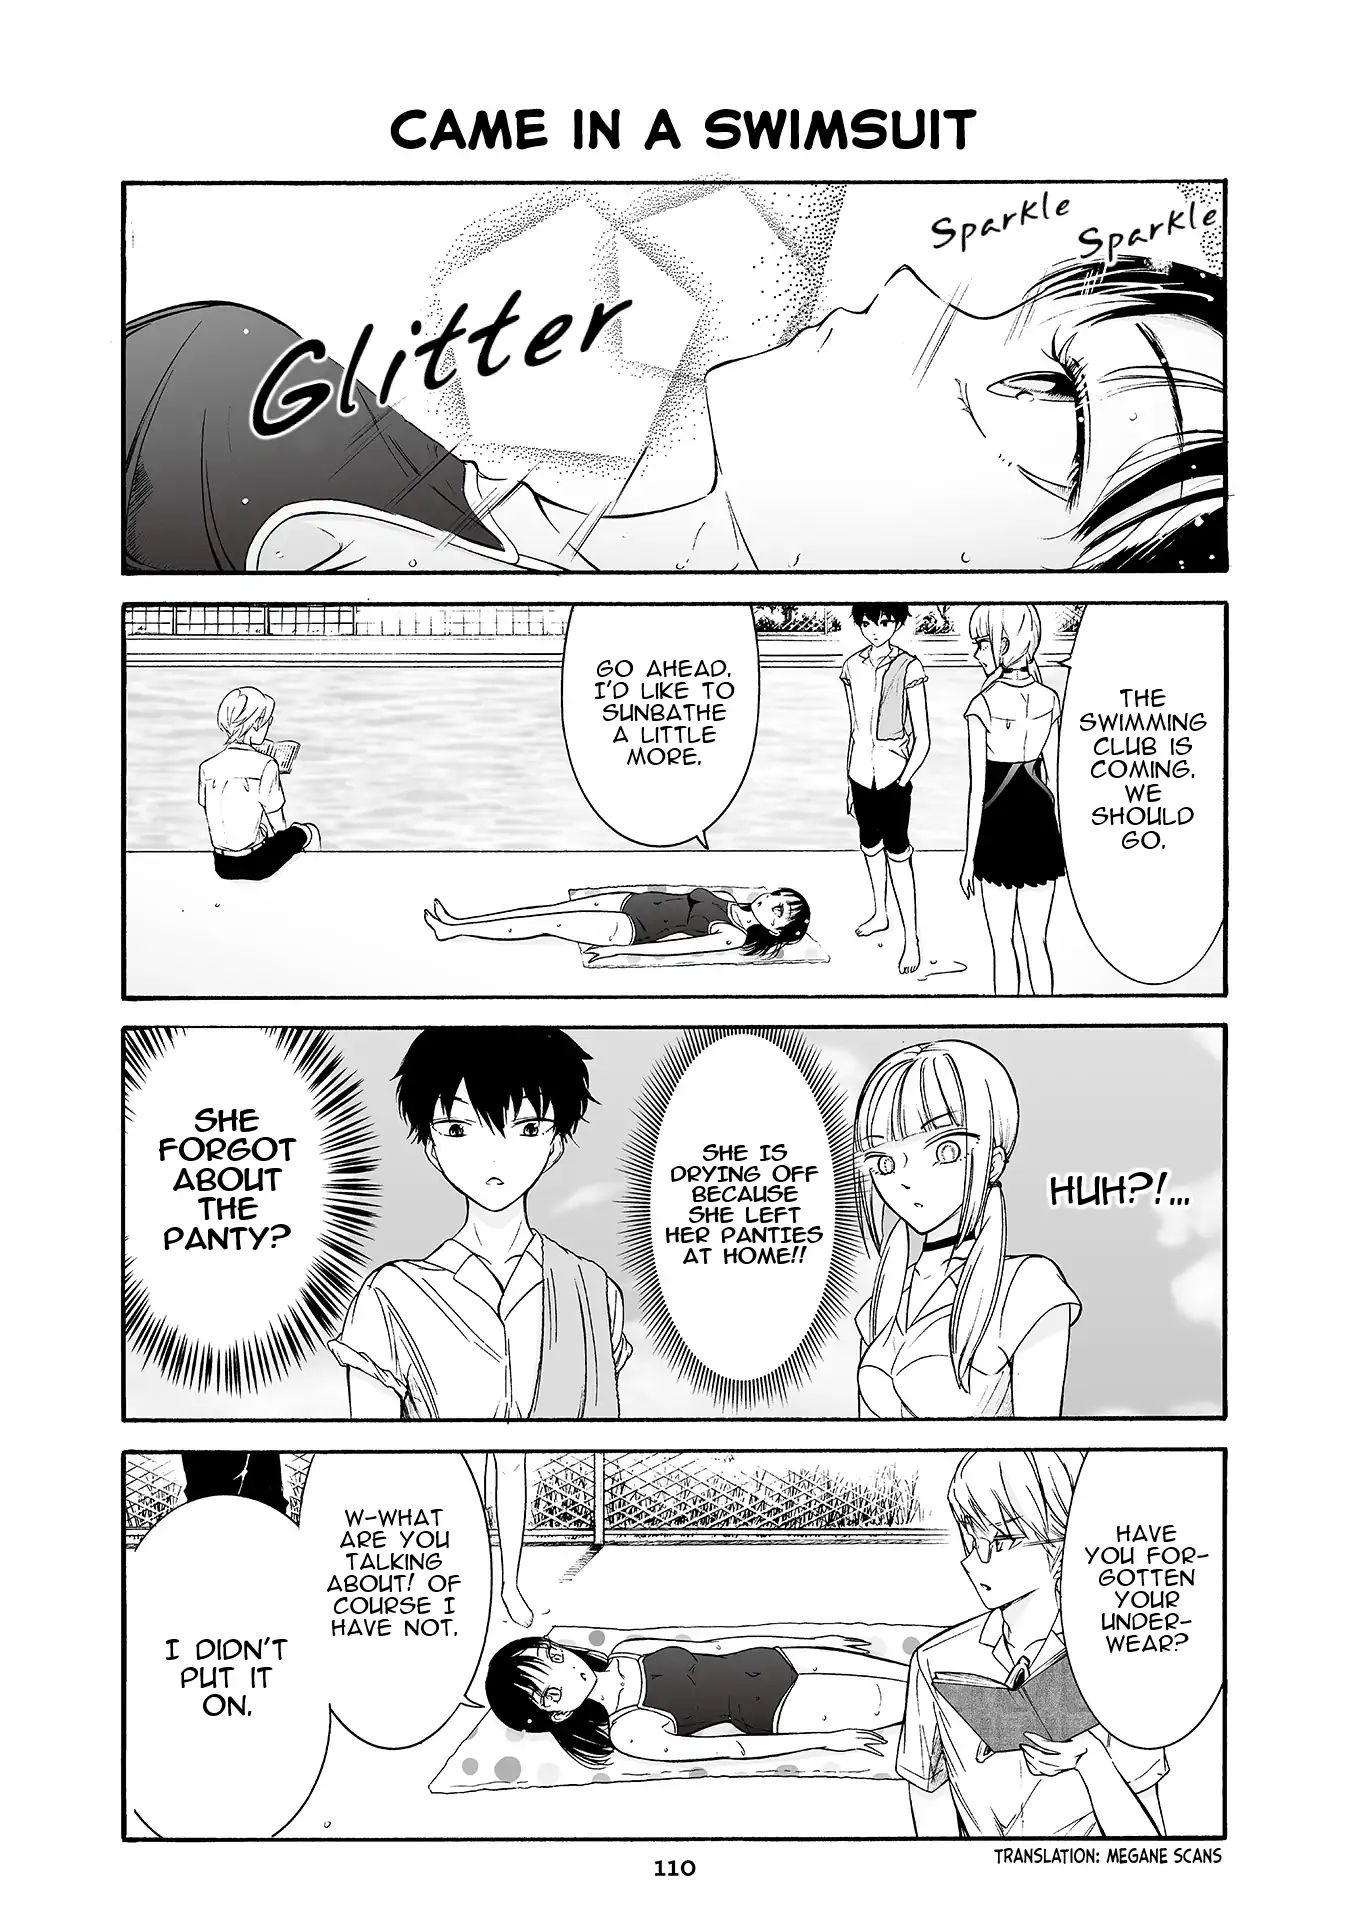 Kuzu to Megane to Bungakushojo (Nise) Vol.2 Chapter 189: Came In A Swimsuit